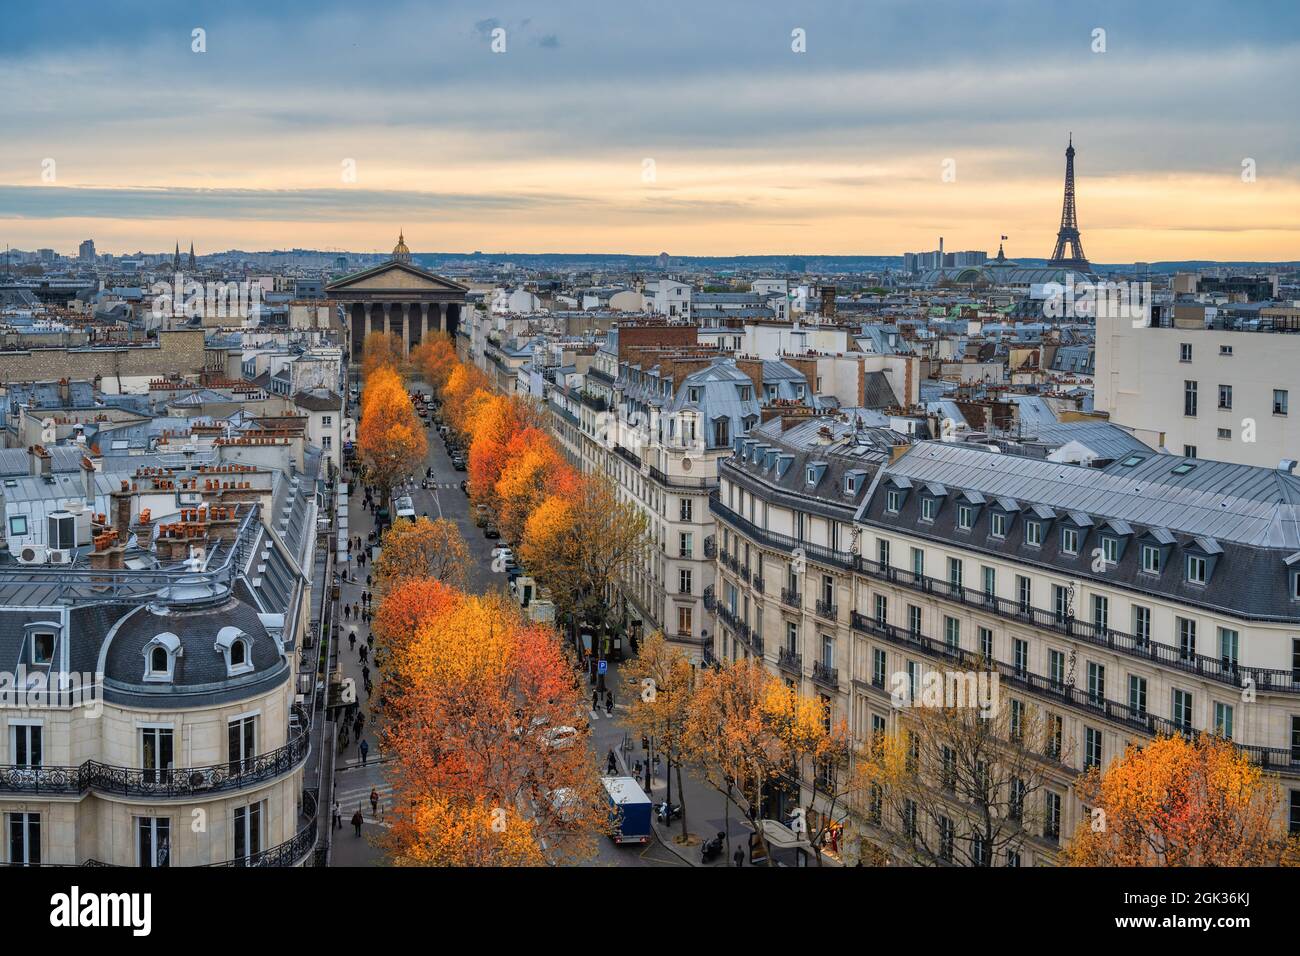 Paris France, high angle view of Eiffel Tower and city skyline with autumn foliage season Stock Photo